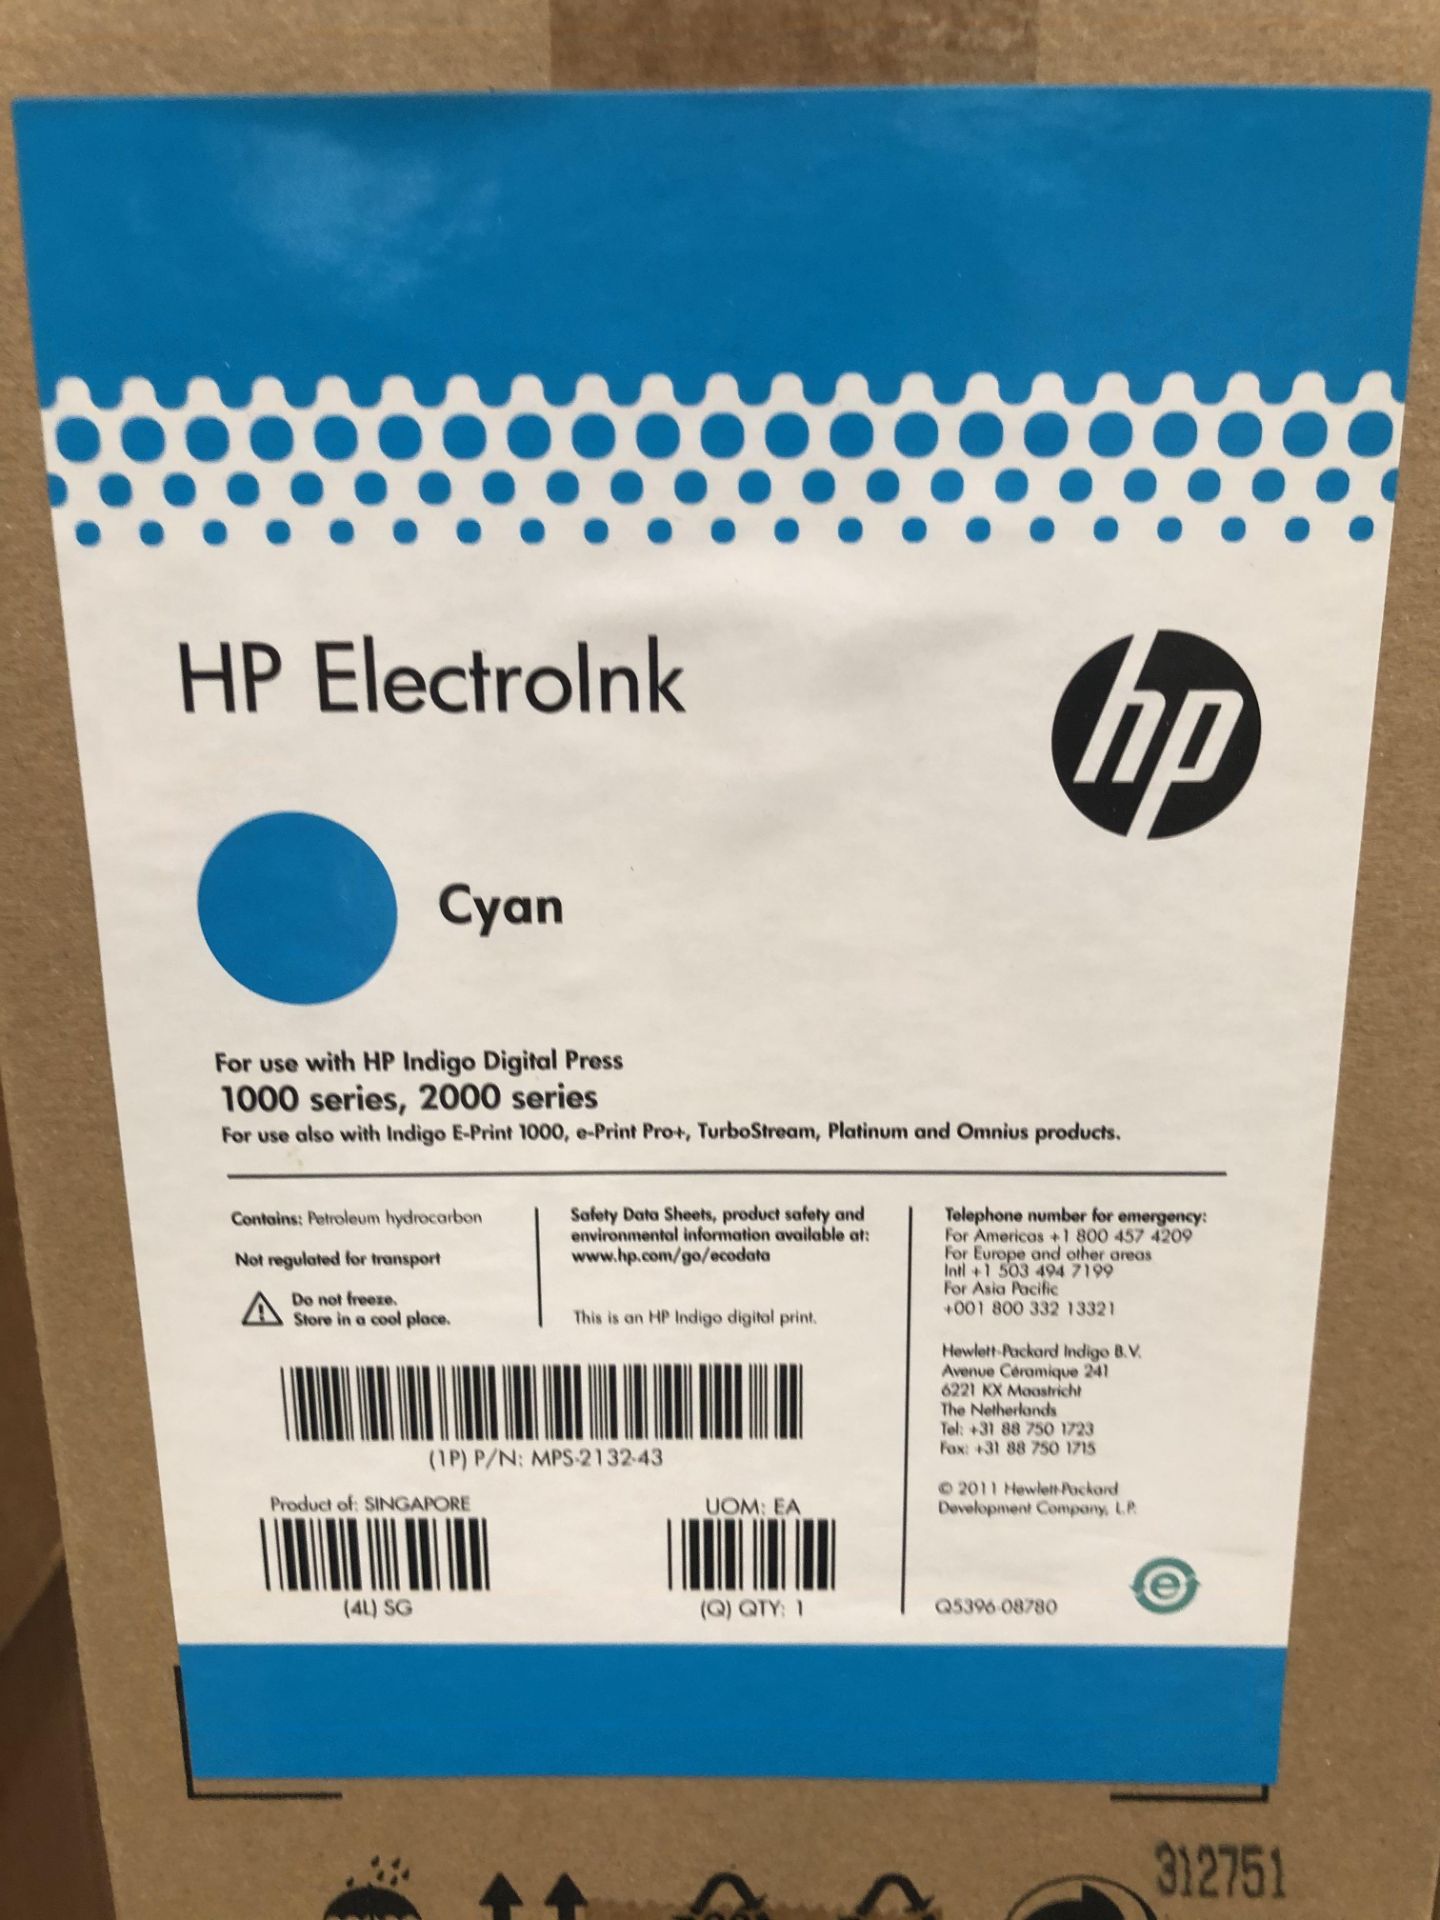 50 Cans of HP ElectroInk Cyan to suit HP Indigo Digital Press 1000 & 2000 Series (to 5 boxes) ( - Bild 2 aus 2